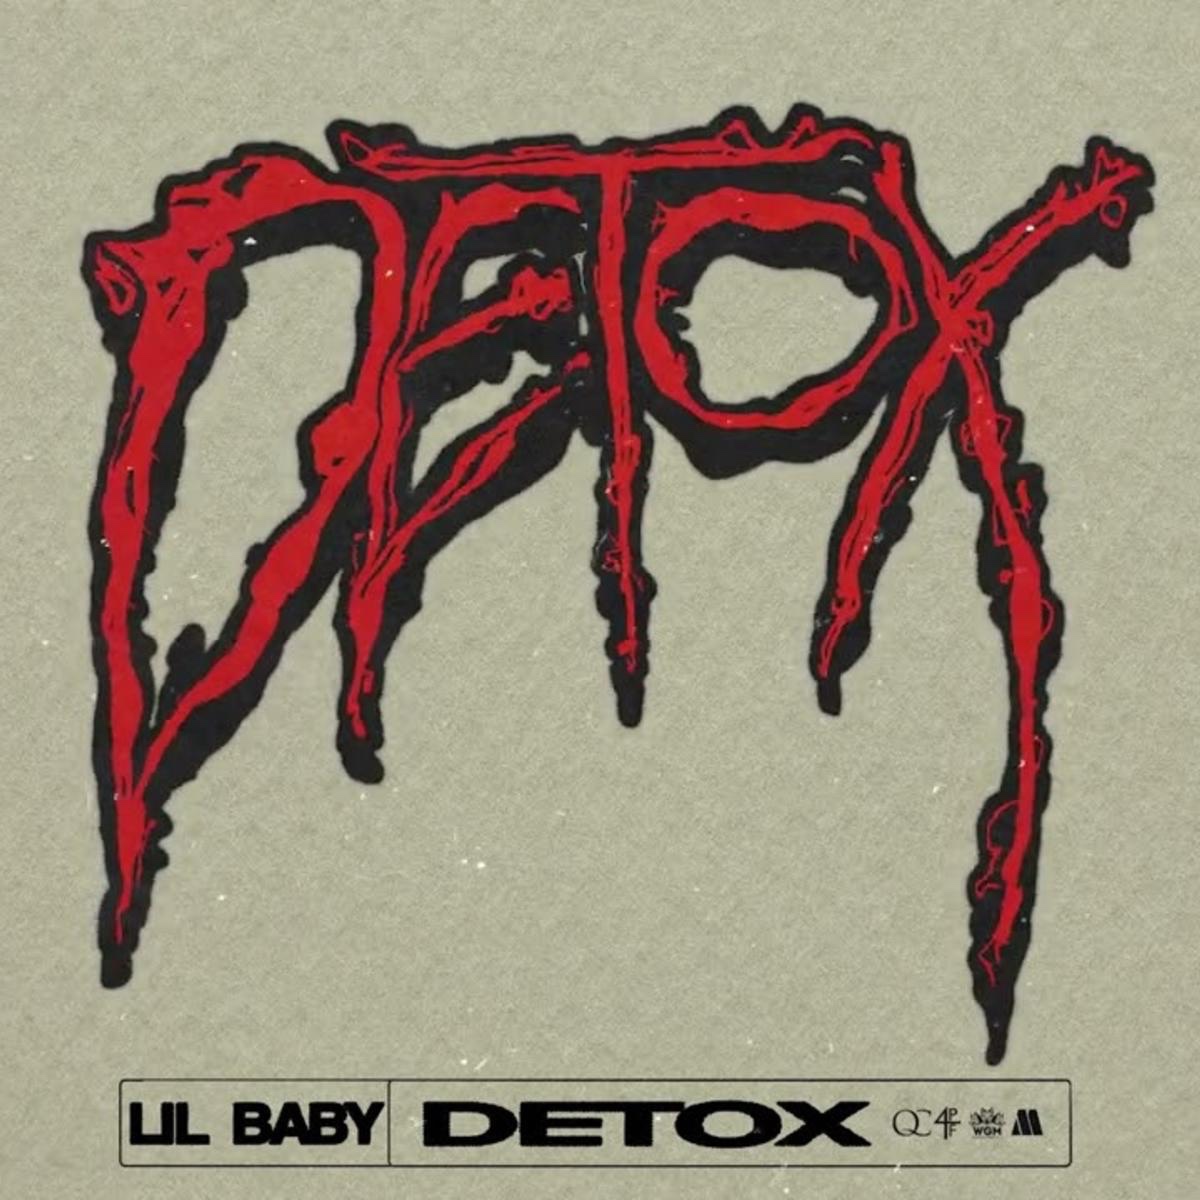 Lil Baby Drops “Detox” Before Dr. Dre